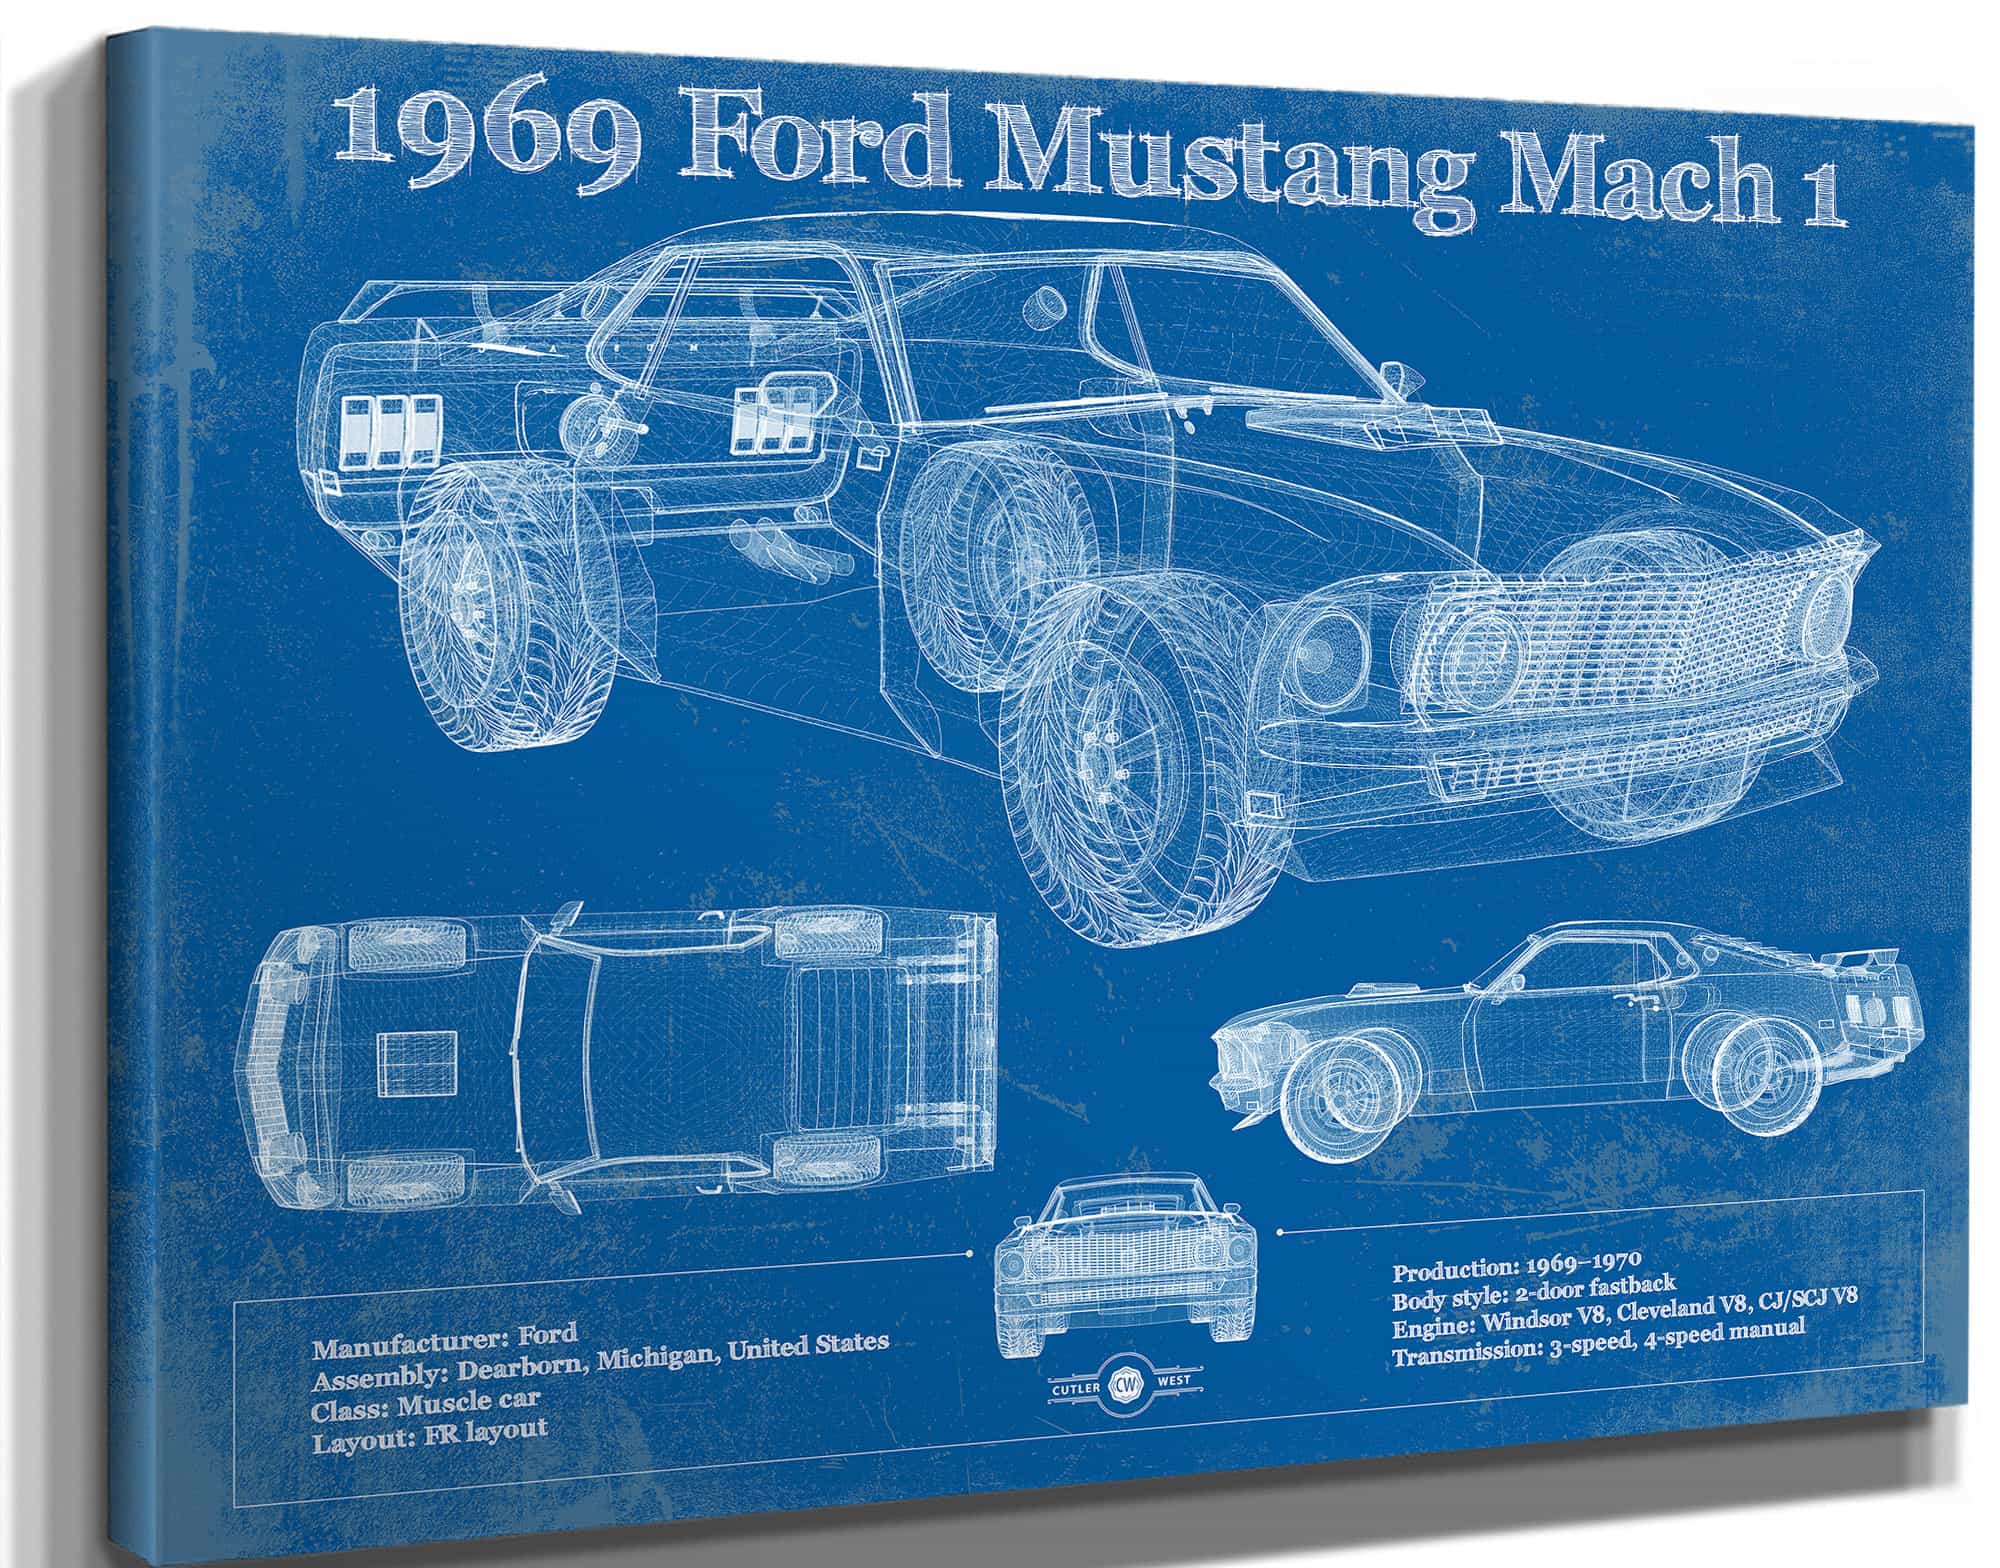 1969 Ford Mustang Mach 1 Vintage Blueprint Auto Print